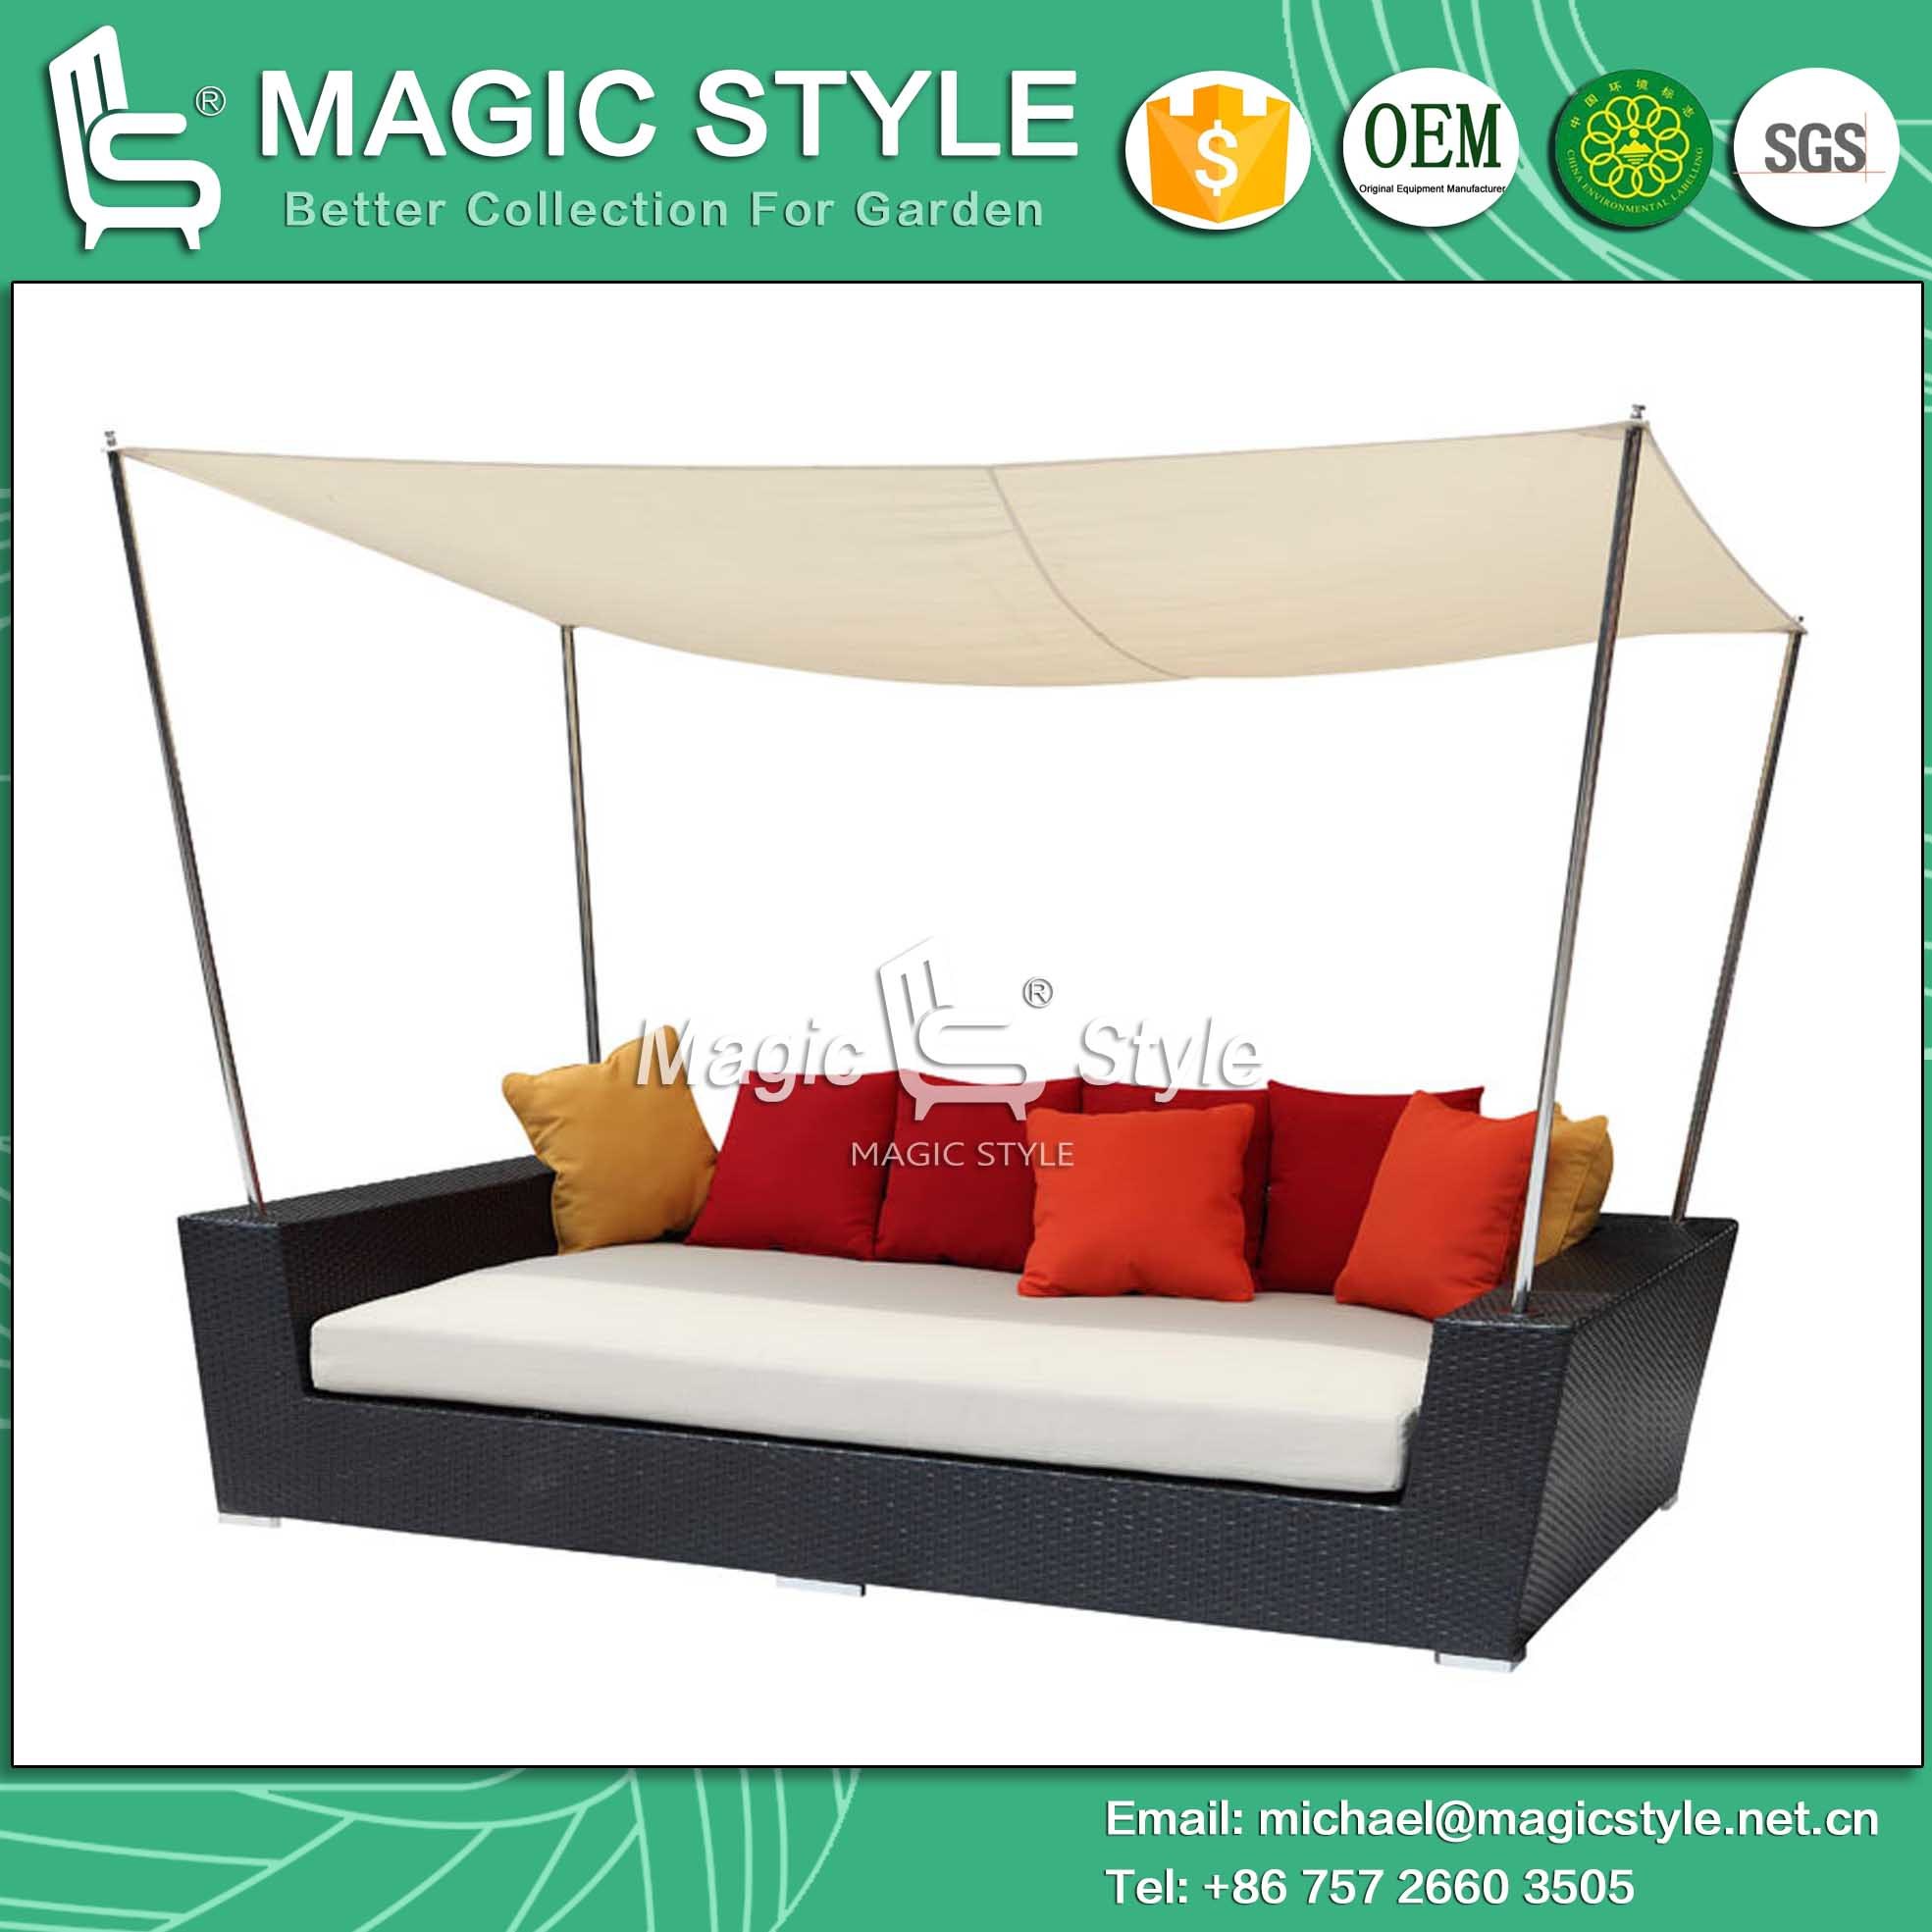 Day Bed Sunbed Deck Chair Chaise Lounge Wicker Double-Sofa 2-Seat Sofa Rattan Furniture (MAGIC STYLE)